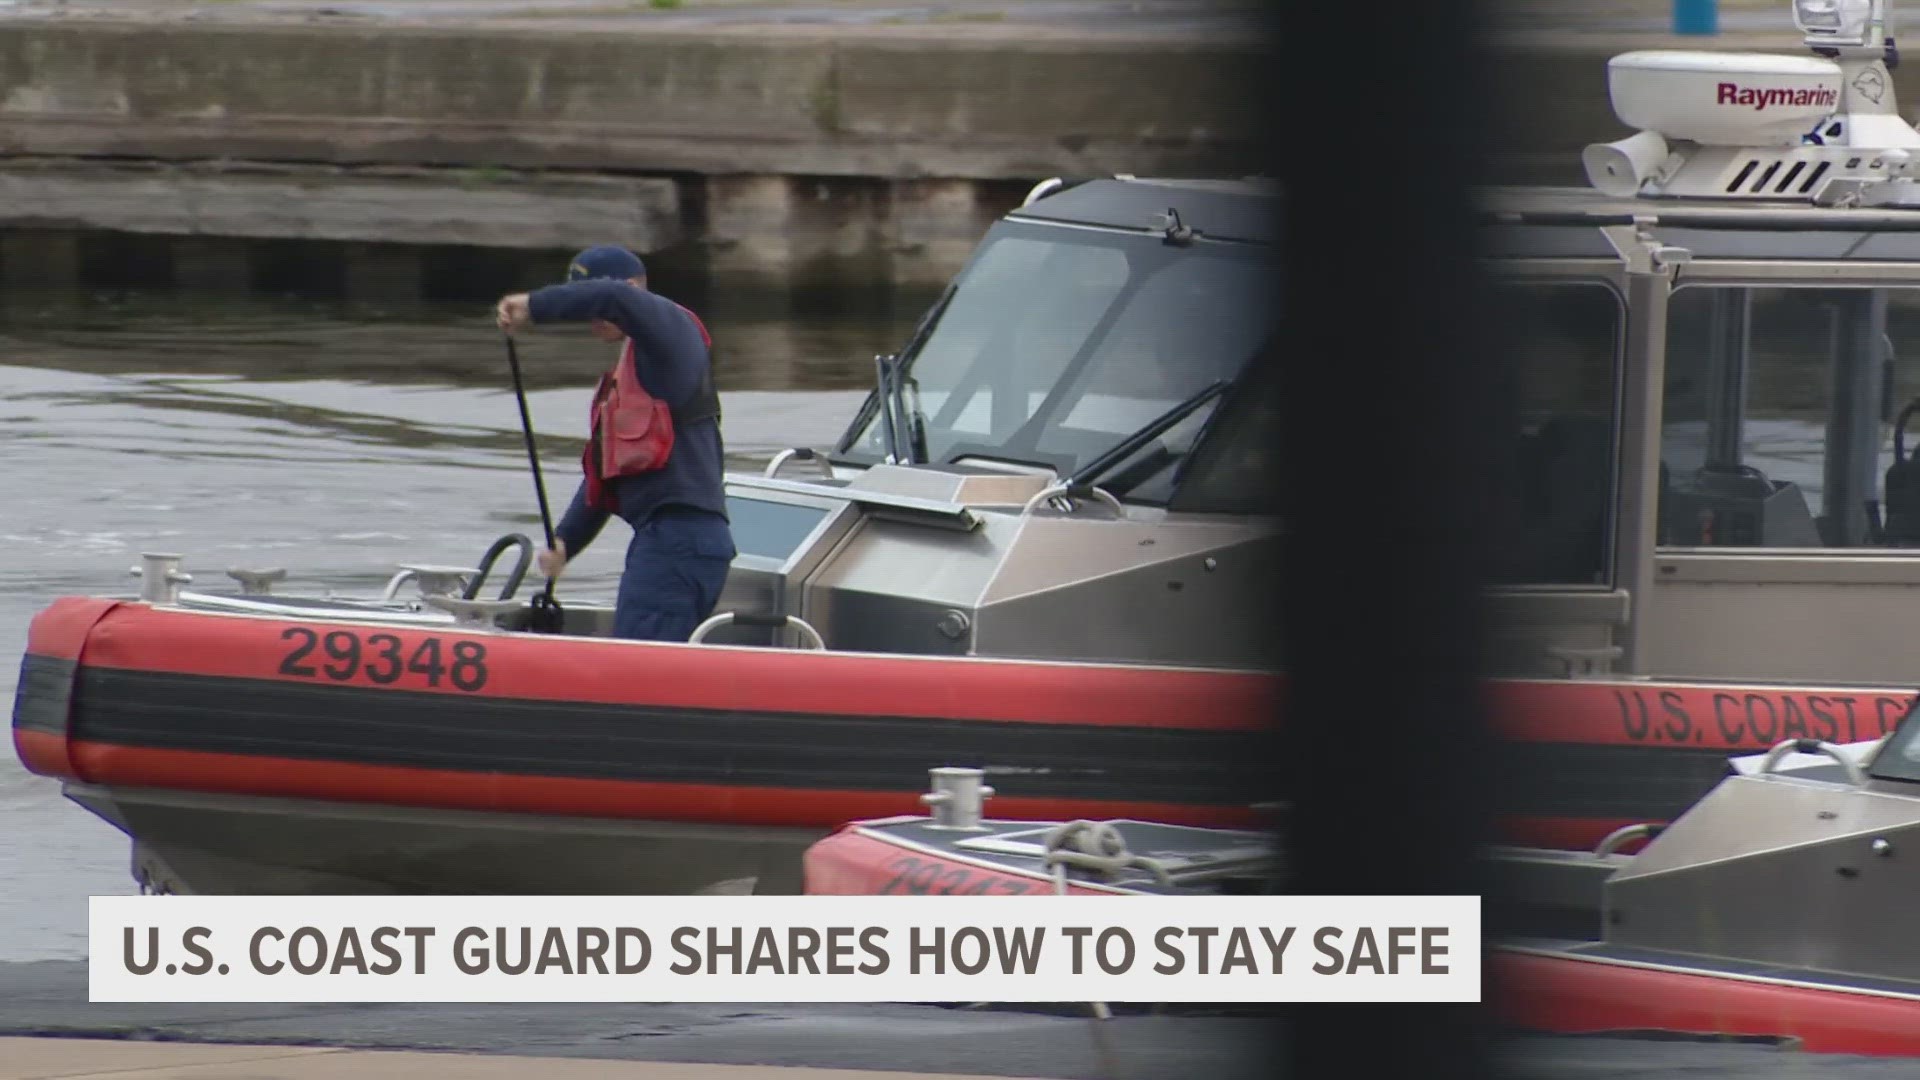 Communicating a float plan, having a life jacket, and using GPS locators can all help in staying safe on the Great Lakes.